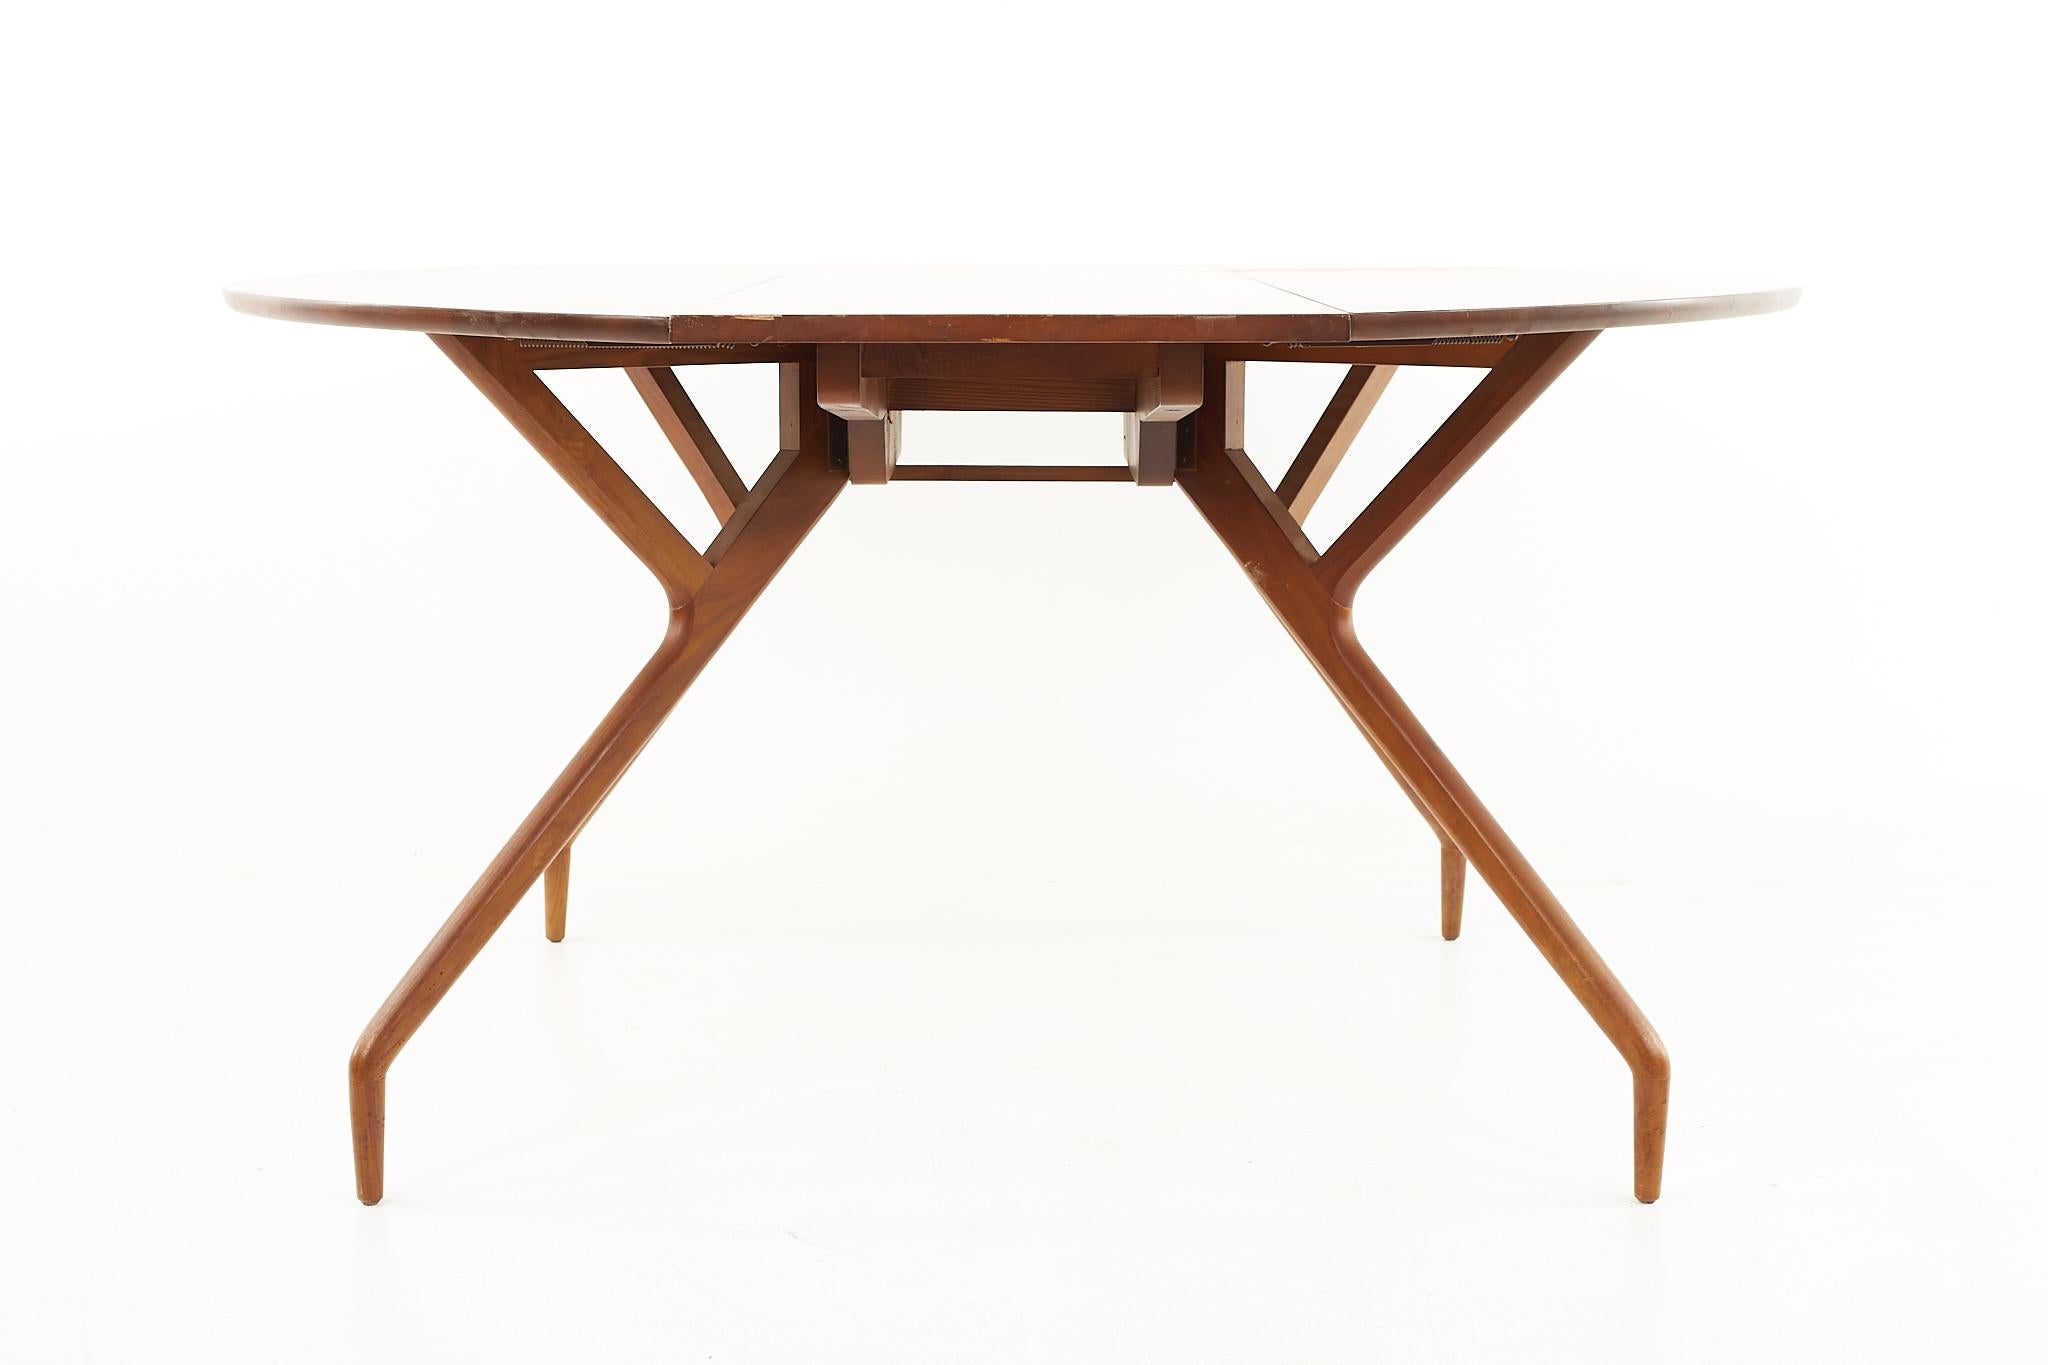 Greta Magnusson Grossman and Edward Frank mid century spider drop leaf dining table

The table measures:18 wide x 60 deep x 28.5 high, with a chair clearance of 27.5 inches high; when the table is opened it measures 54 inches wide 

All pieces